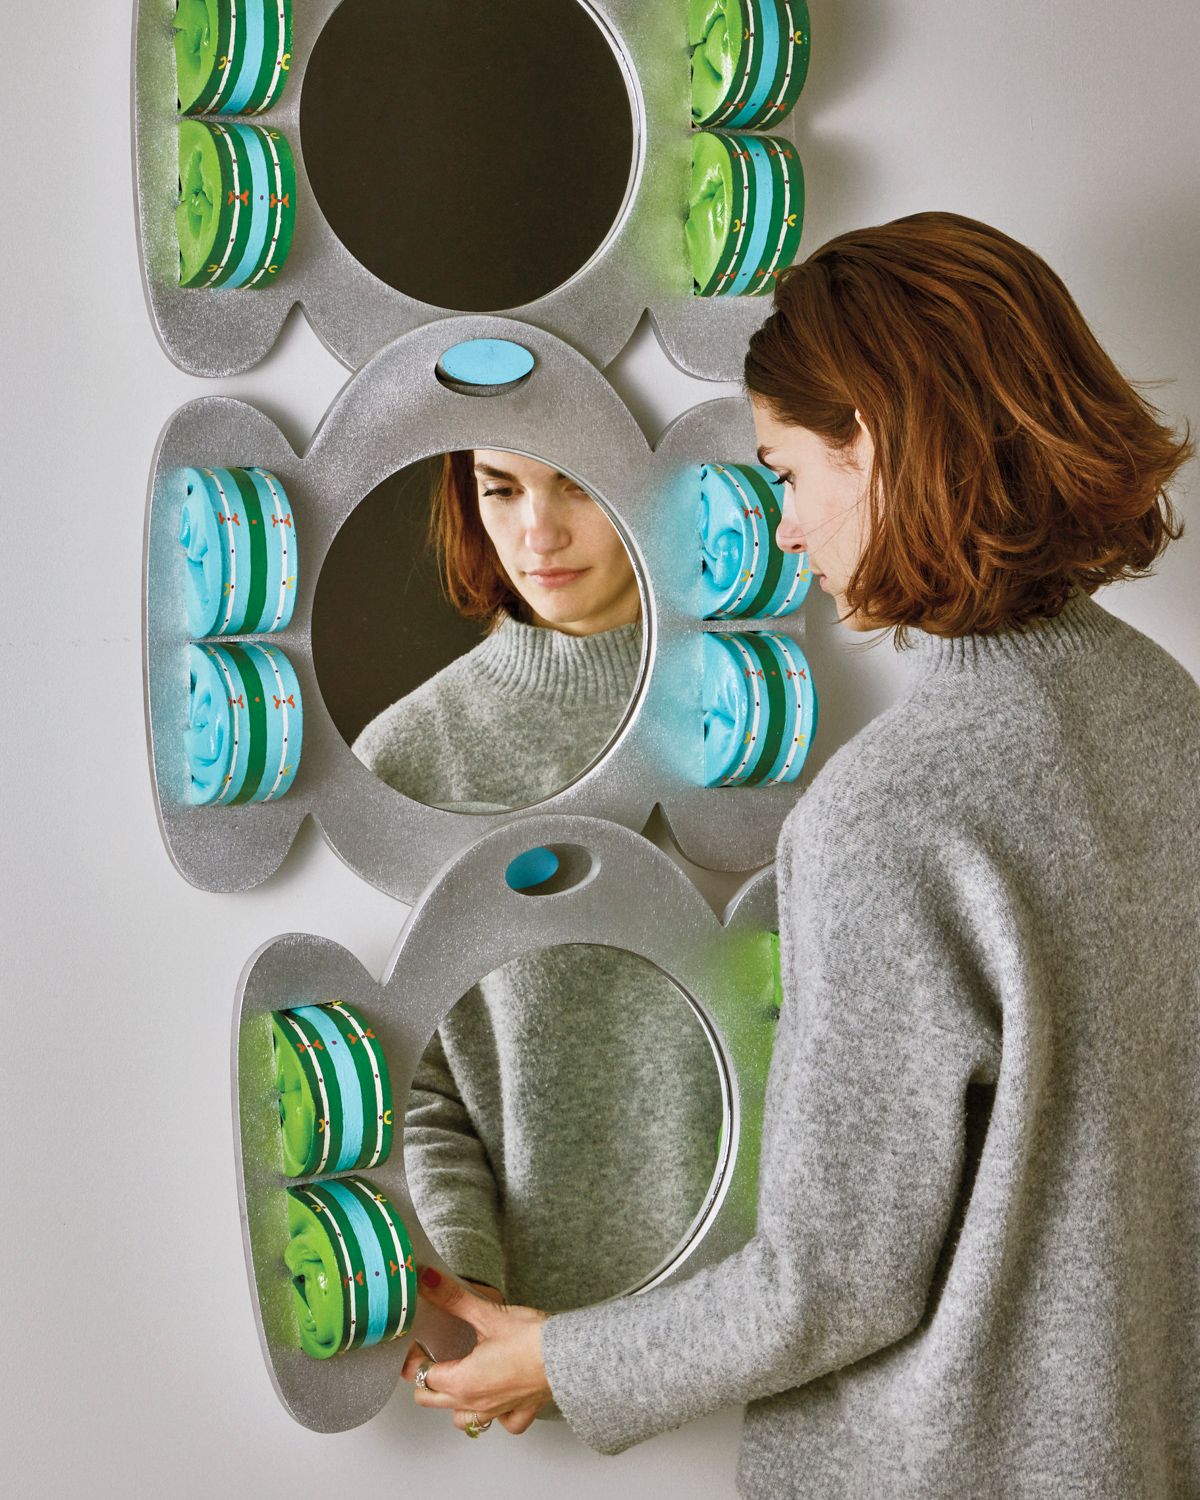 Artist Kiki Got looking into one of her three-piece, amorphous-shaped mirrors